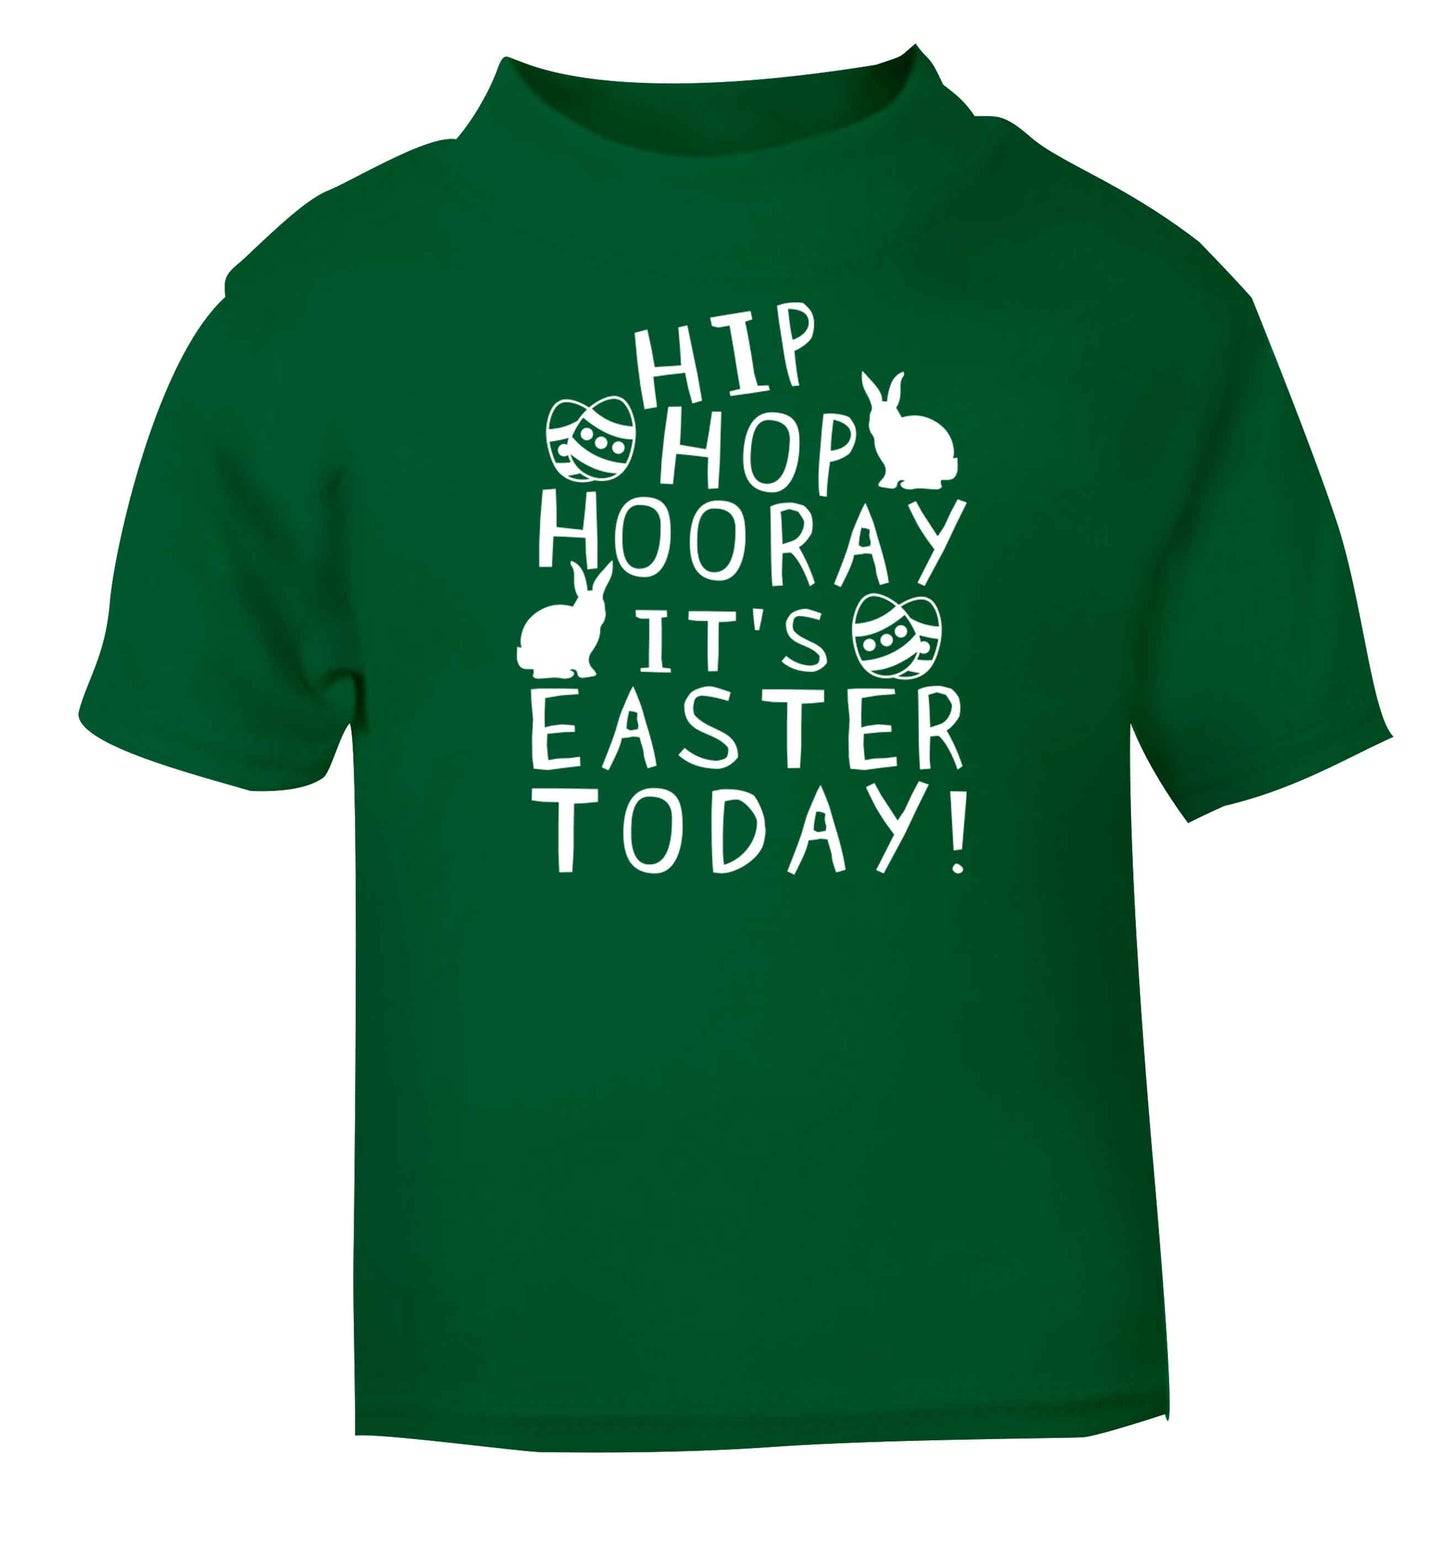 Hip hip hooray it's Easter today! green baby toddler Tshirt 2 Years